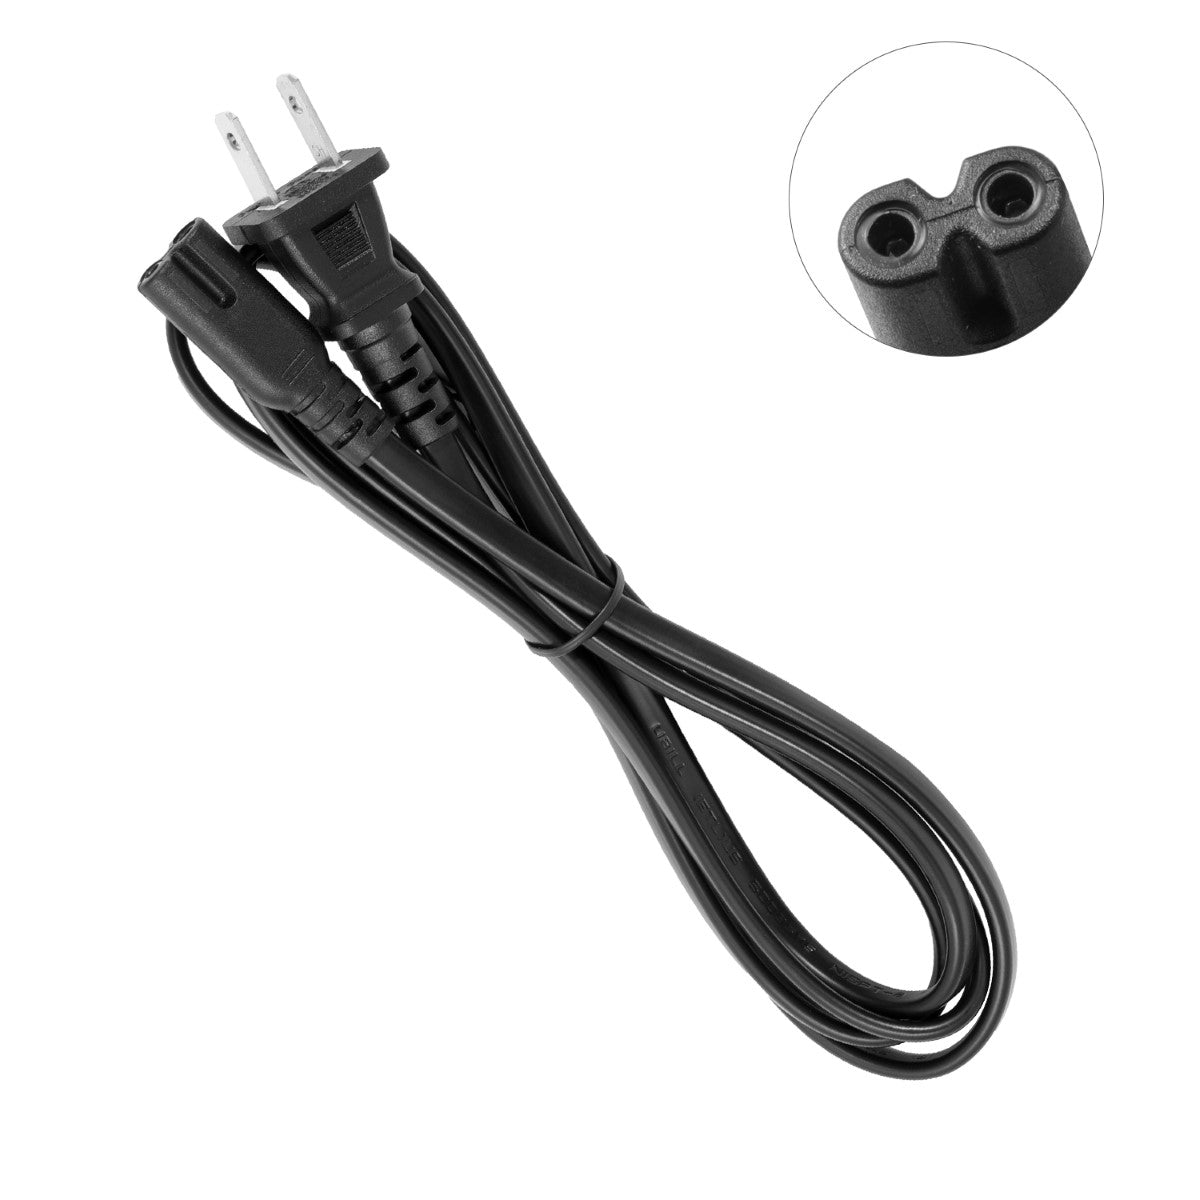 Power Cord for HP Officejet Pro 276dw Printer.